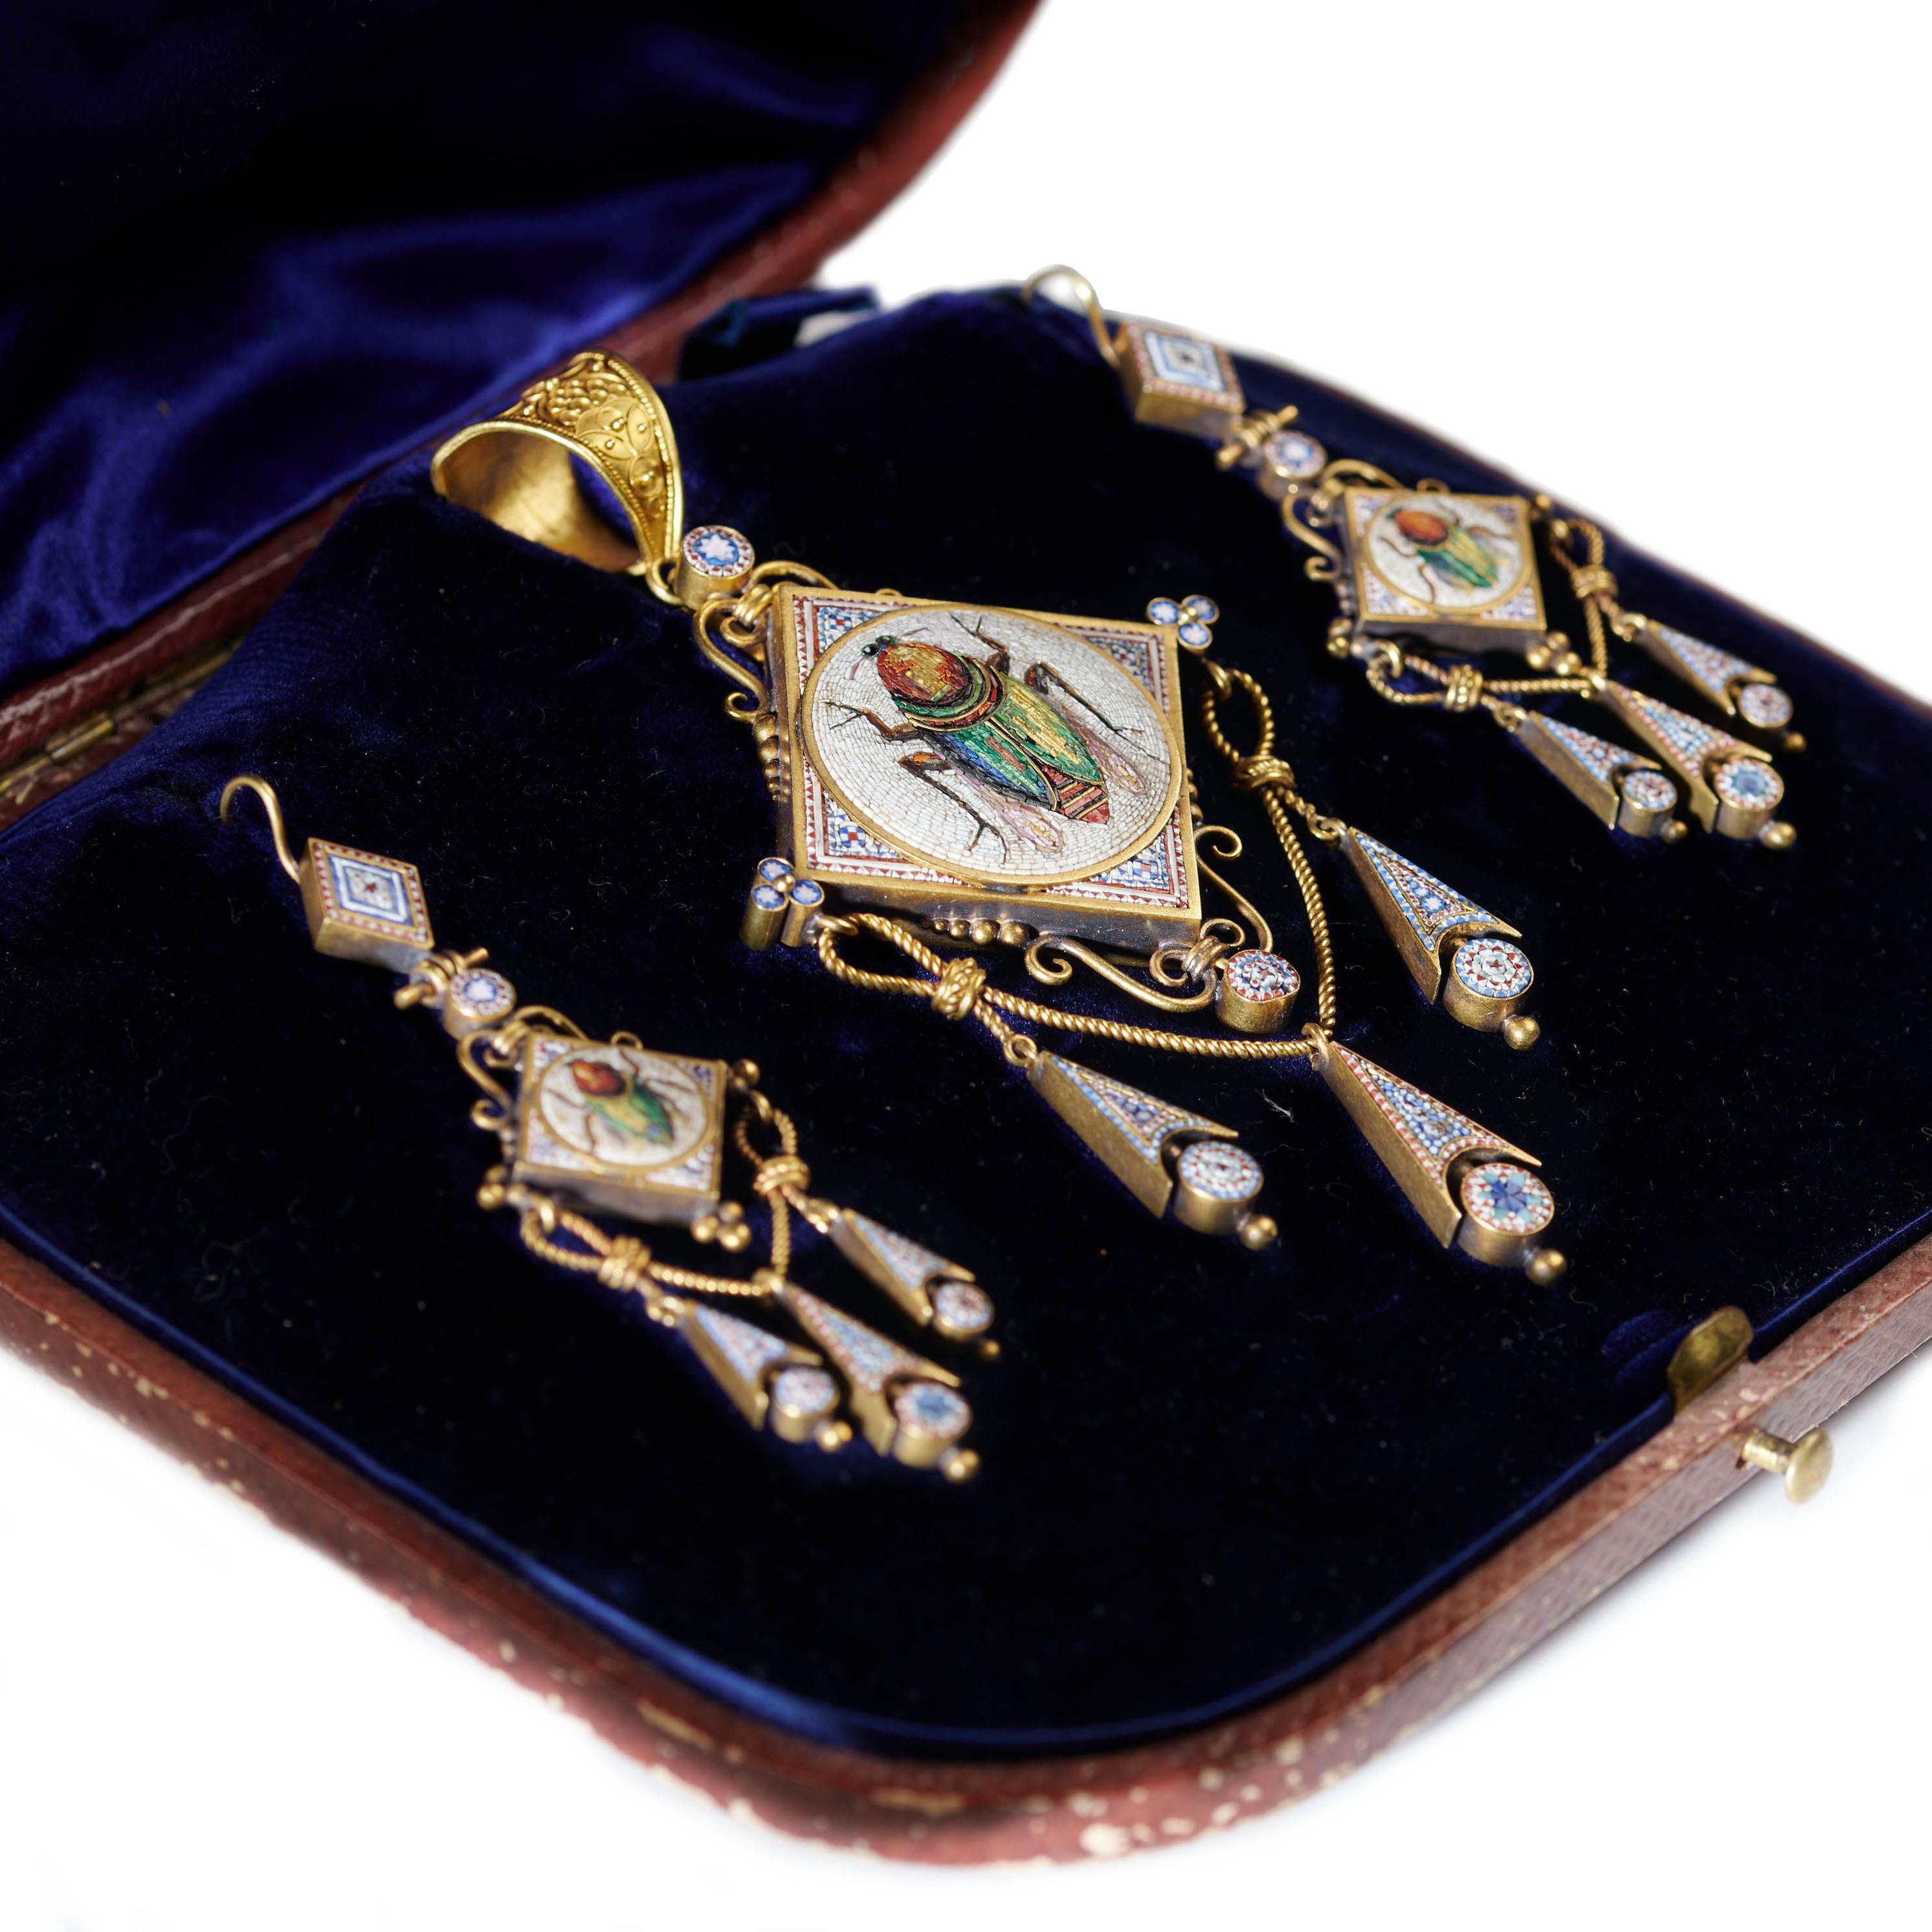 Women's Antique Italian Micromosaic Gold Brooch-Pendant And Earrings Suite, Circa 1840 For Sale